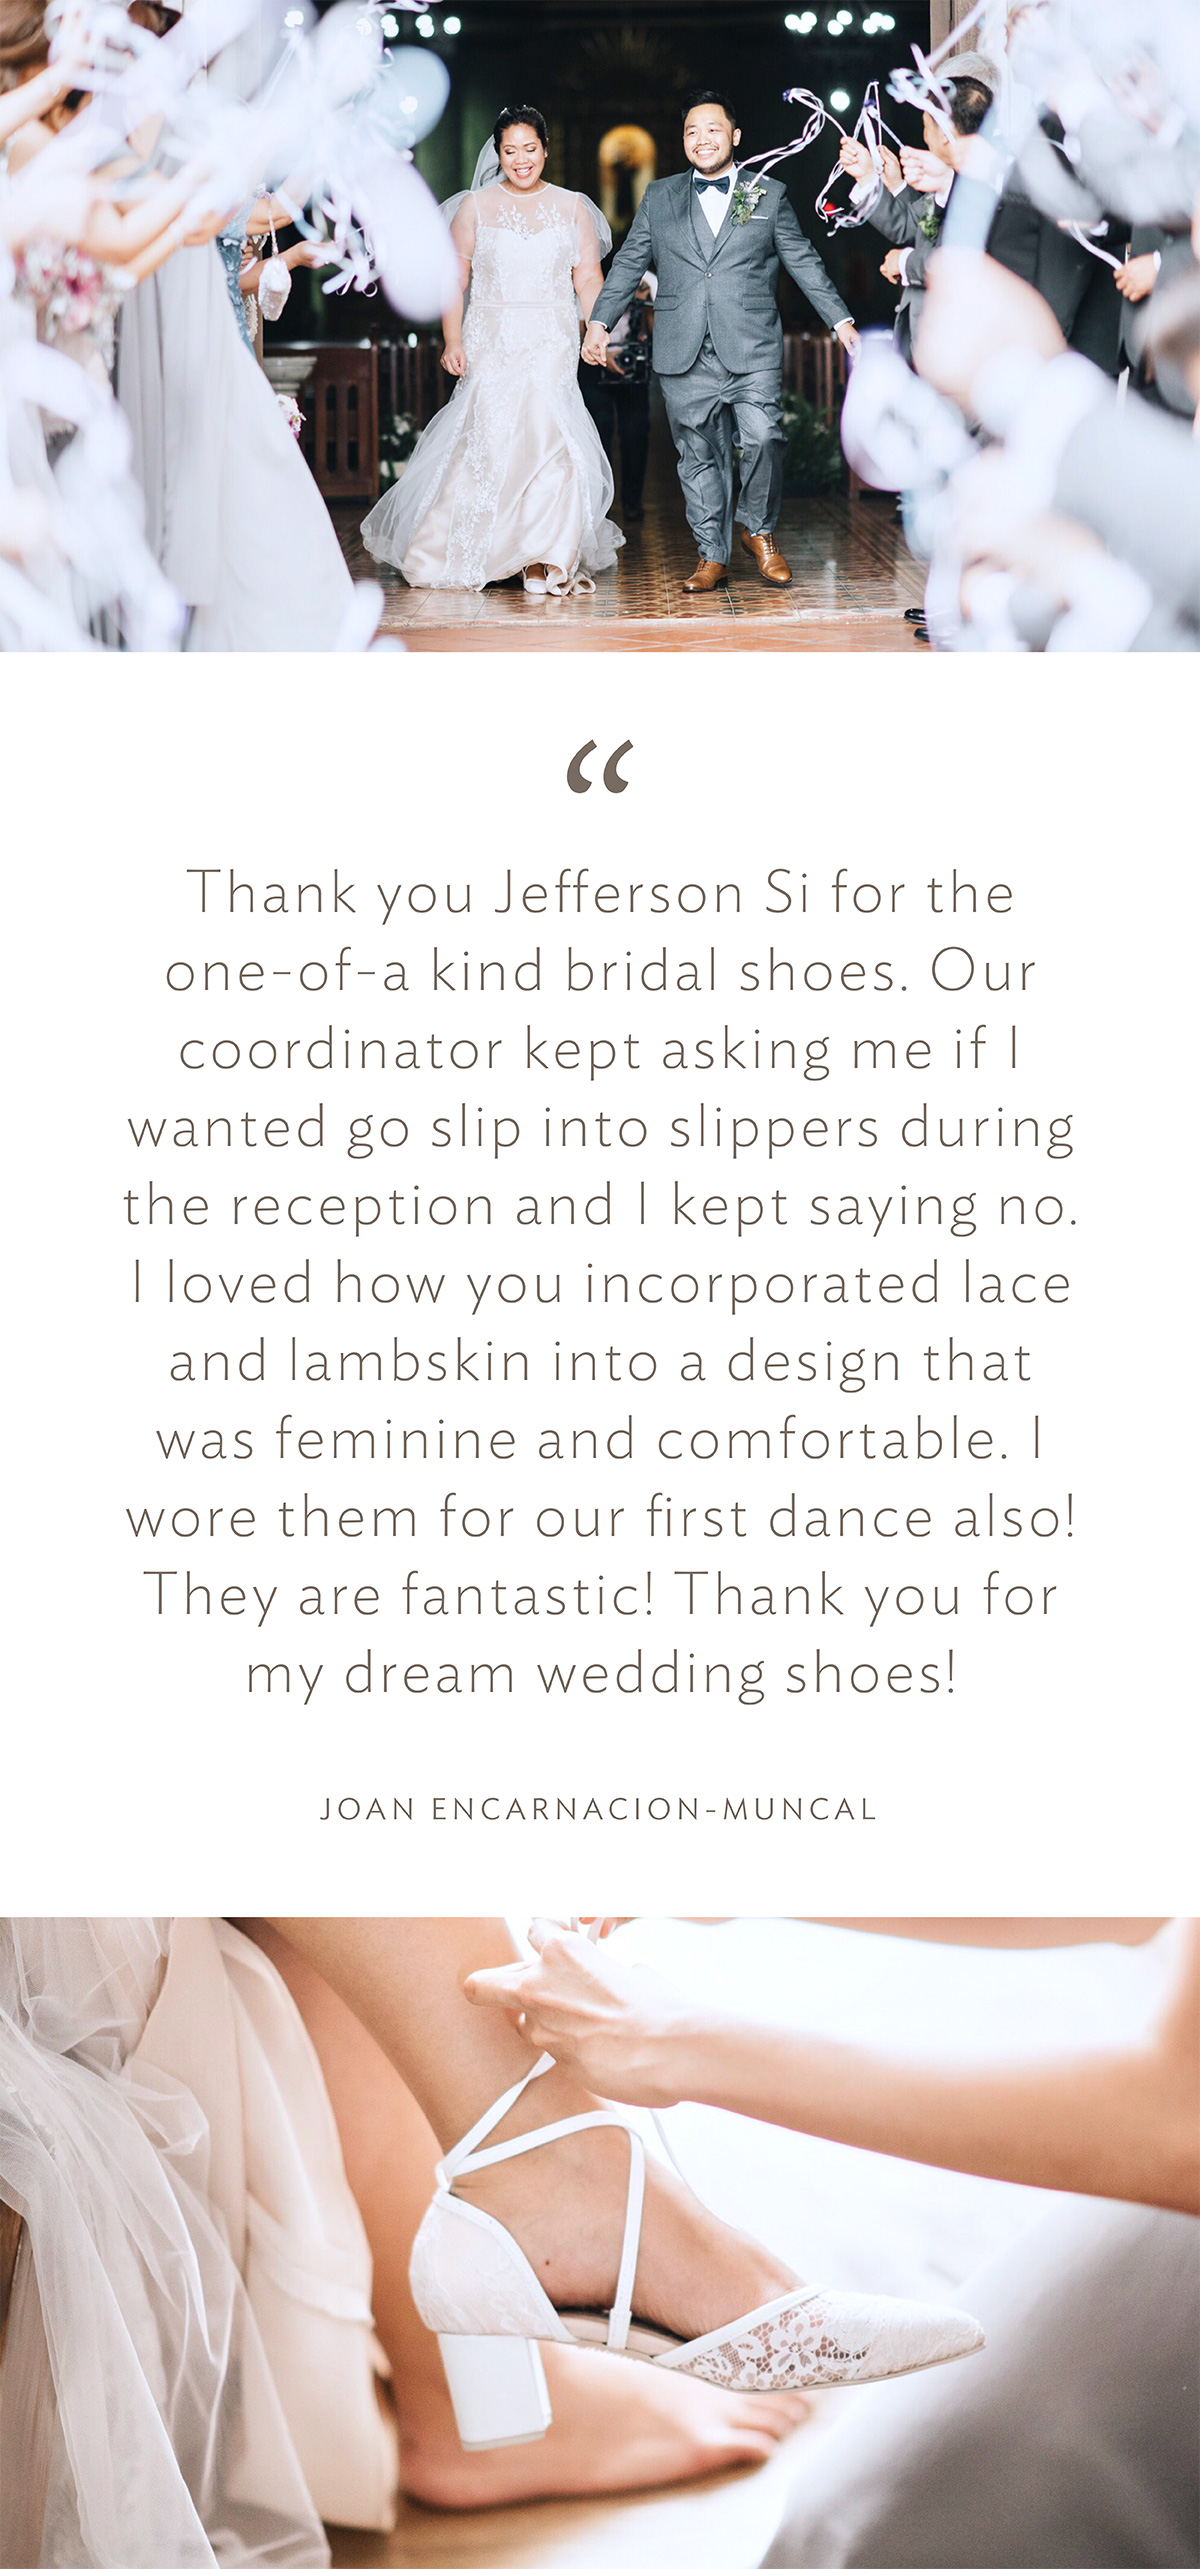 “Thank you Jefferson Si for the one-of-a kind bridal shoes. Our coordinator kept asking me if I wanted go slip into slippers during the reception and I kept saying no. I loved how you incorporated lace and lambskin into a design that was feminine and comfortable. I wore them for our first dance also! They are fantastic! Thank you for my dream wedding shoes!” (Joan Encarnacion-Muncal)